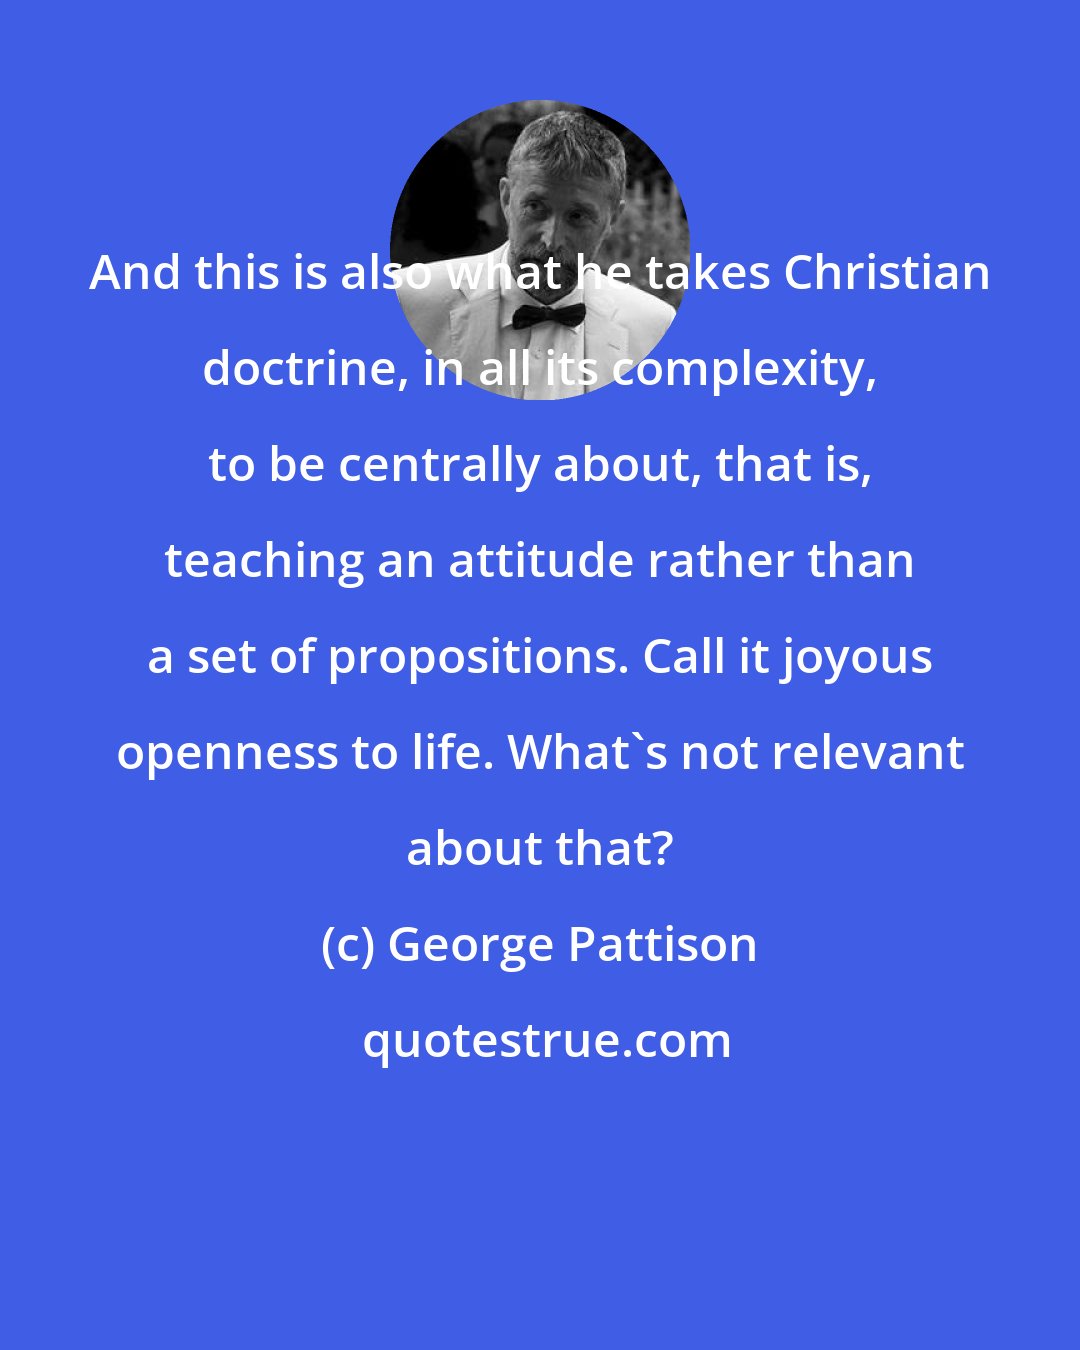 George Pattison: And this is also what he takes Christian doctrine, in all its complexity, to be centrally about, that is, teaching an attitude rather than a set of propositions. Call it joyous openness to life. What's not relevant about that?